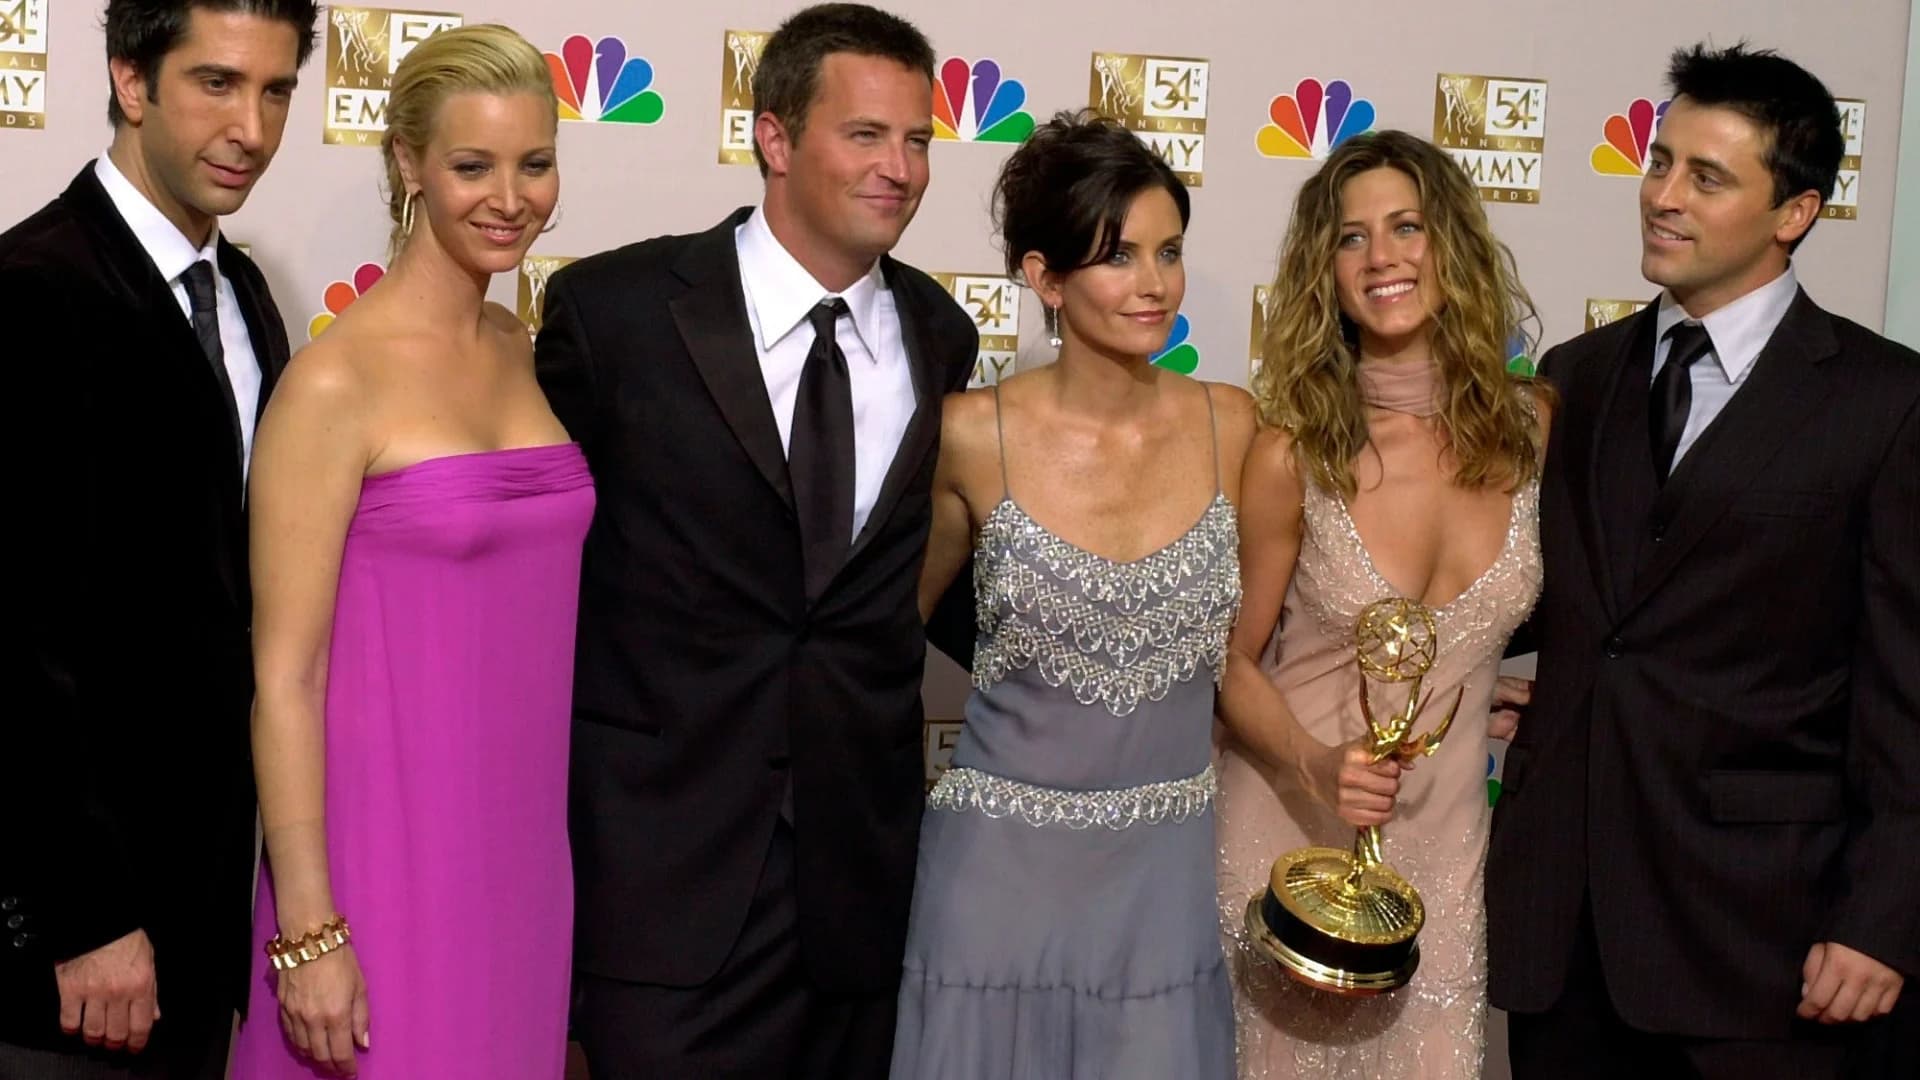 ‘Oh...My...Gawd’ – ‘Friends’ hitting the big screen this fall to celebrate 25th anniversary